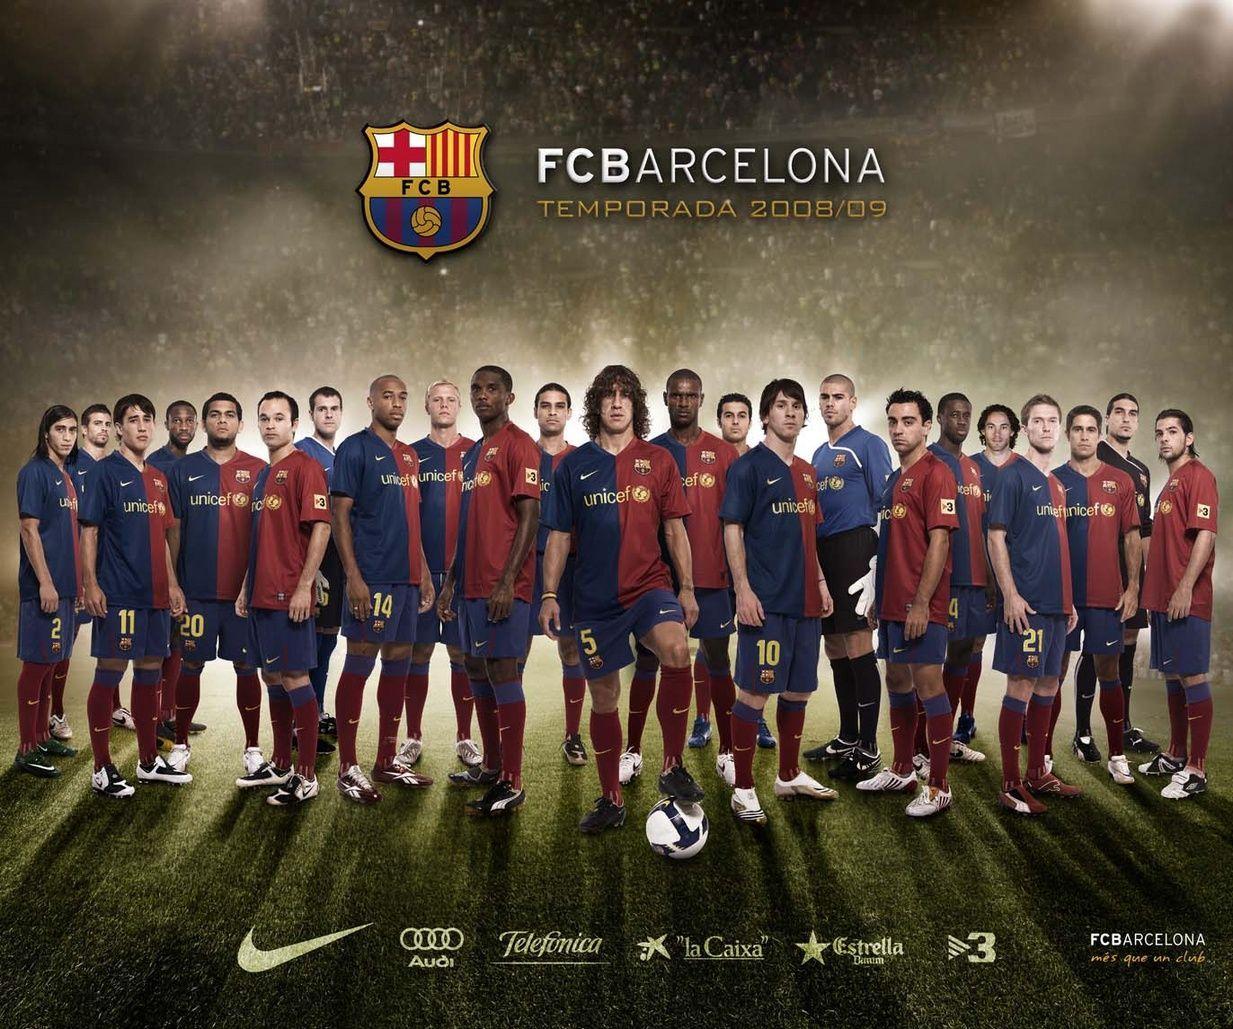 Awesome Barcelona Football Club Laliga Wallpaper: Awesome Soccer